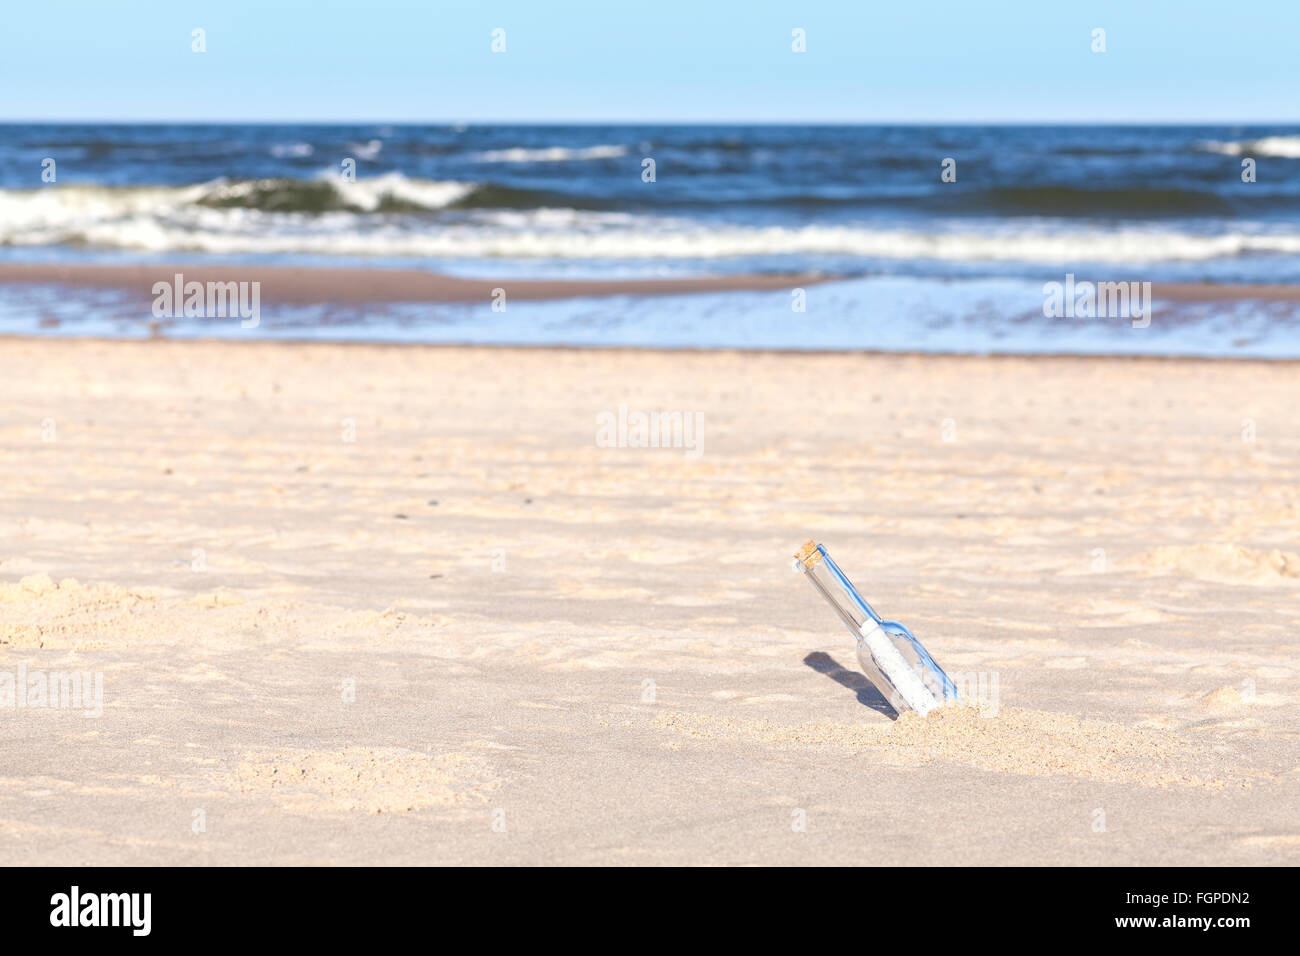 Bottle with letter on a beach, shallow depth of field. Stock Photo